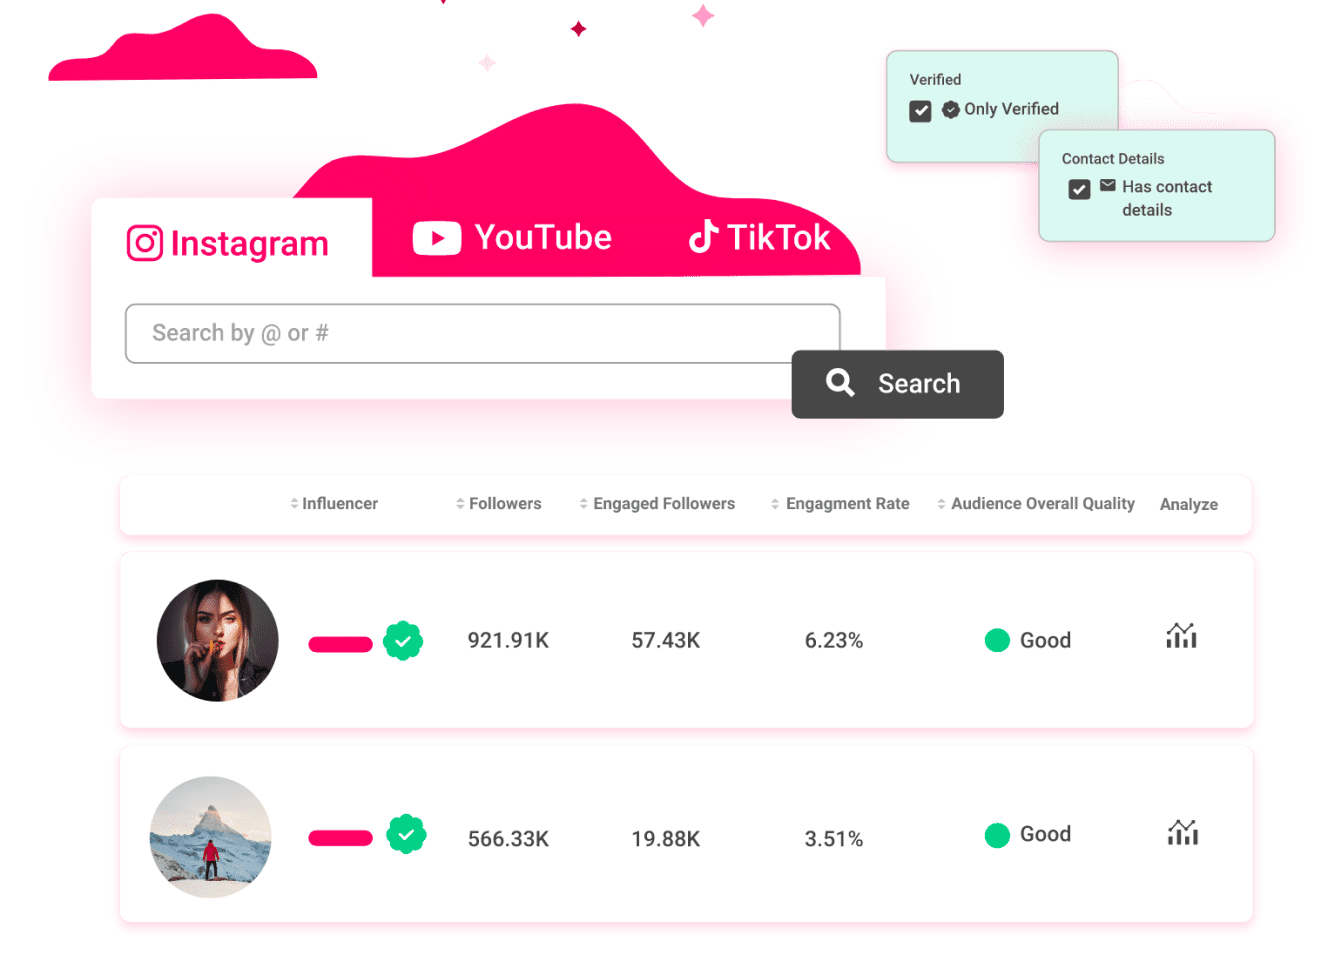 Interface of a digital influencer analysis tool showing search options and stats for profiles on instagram, youtube, and tiktok, including follower count and engagement rates.